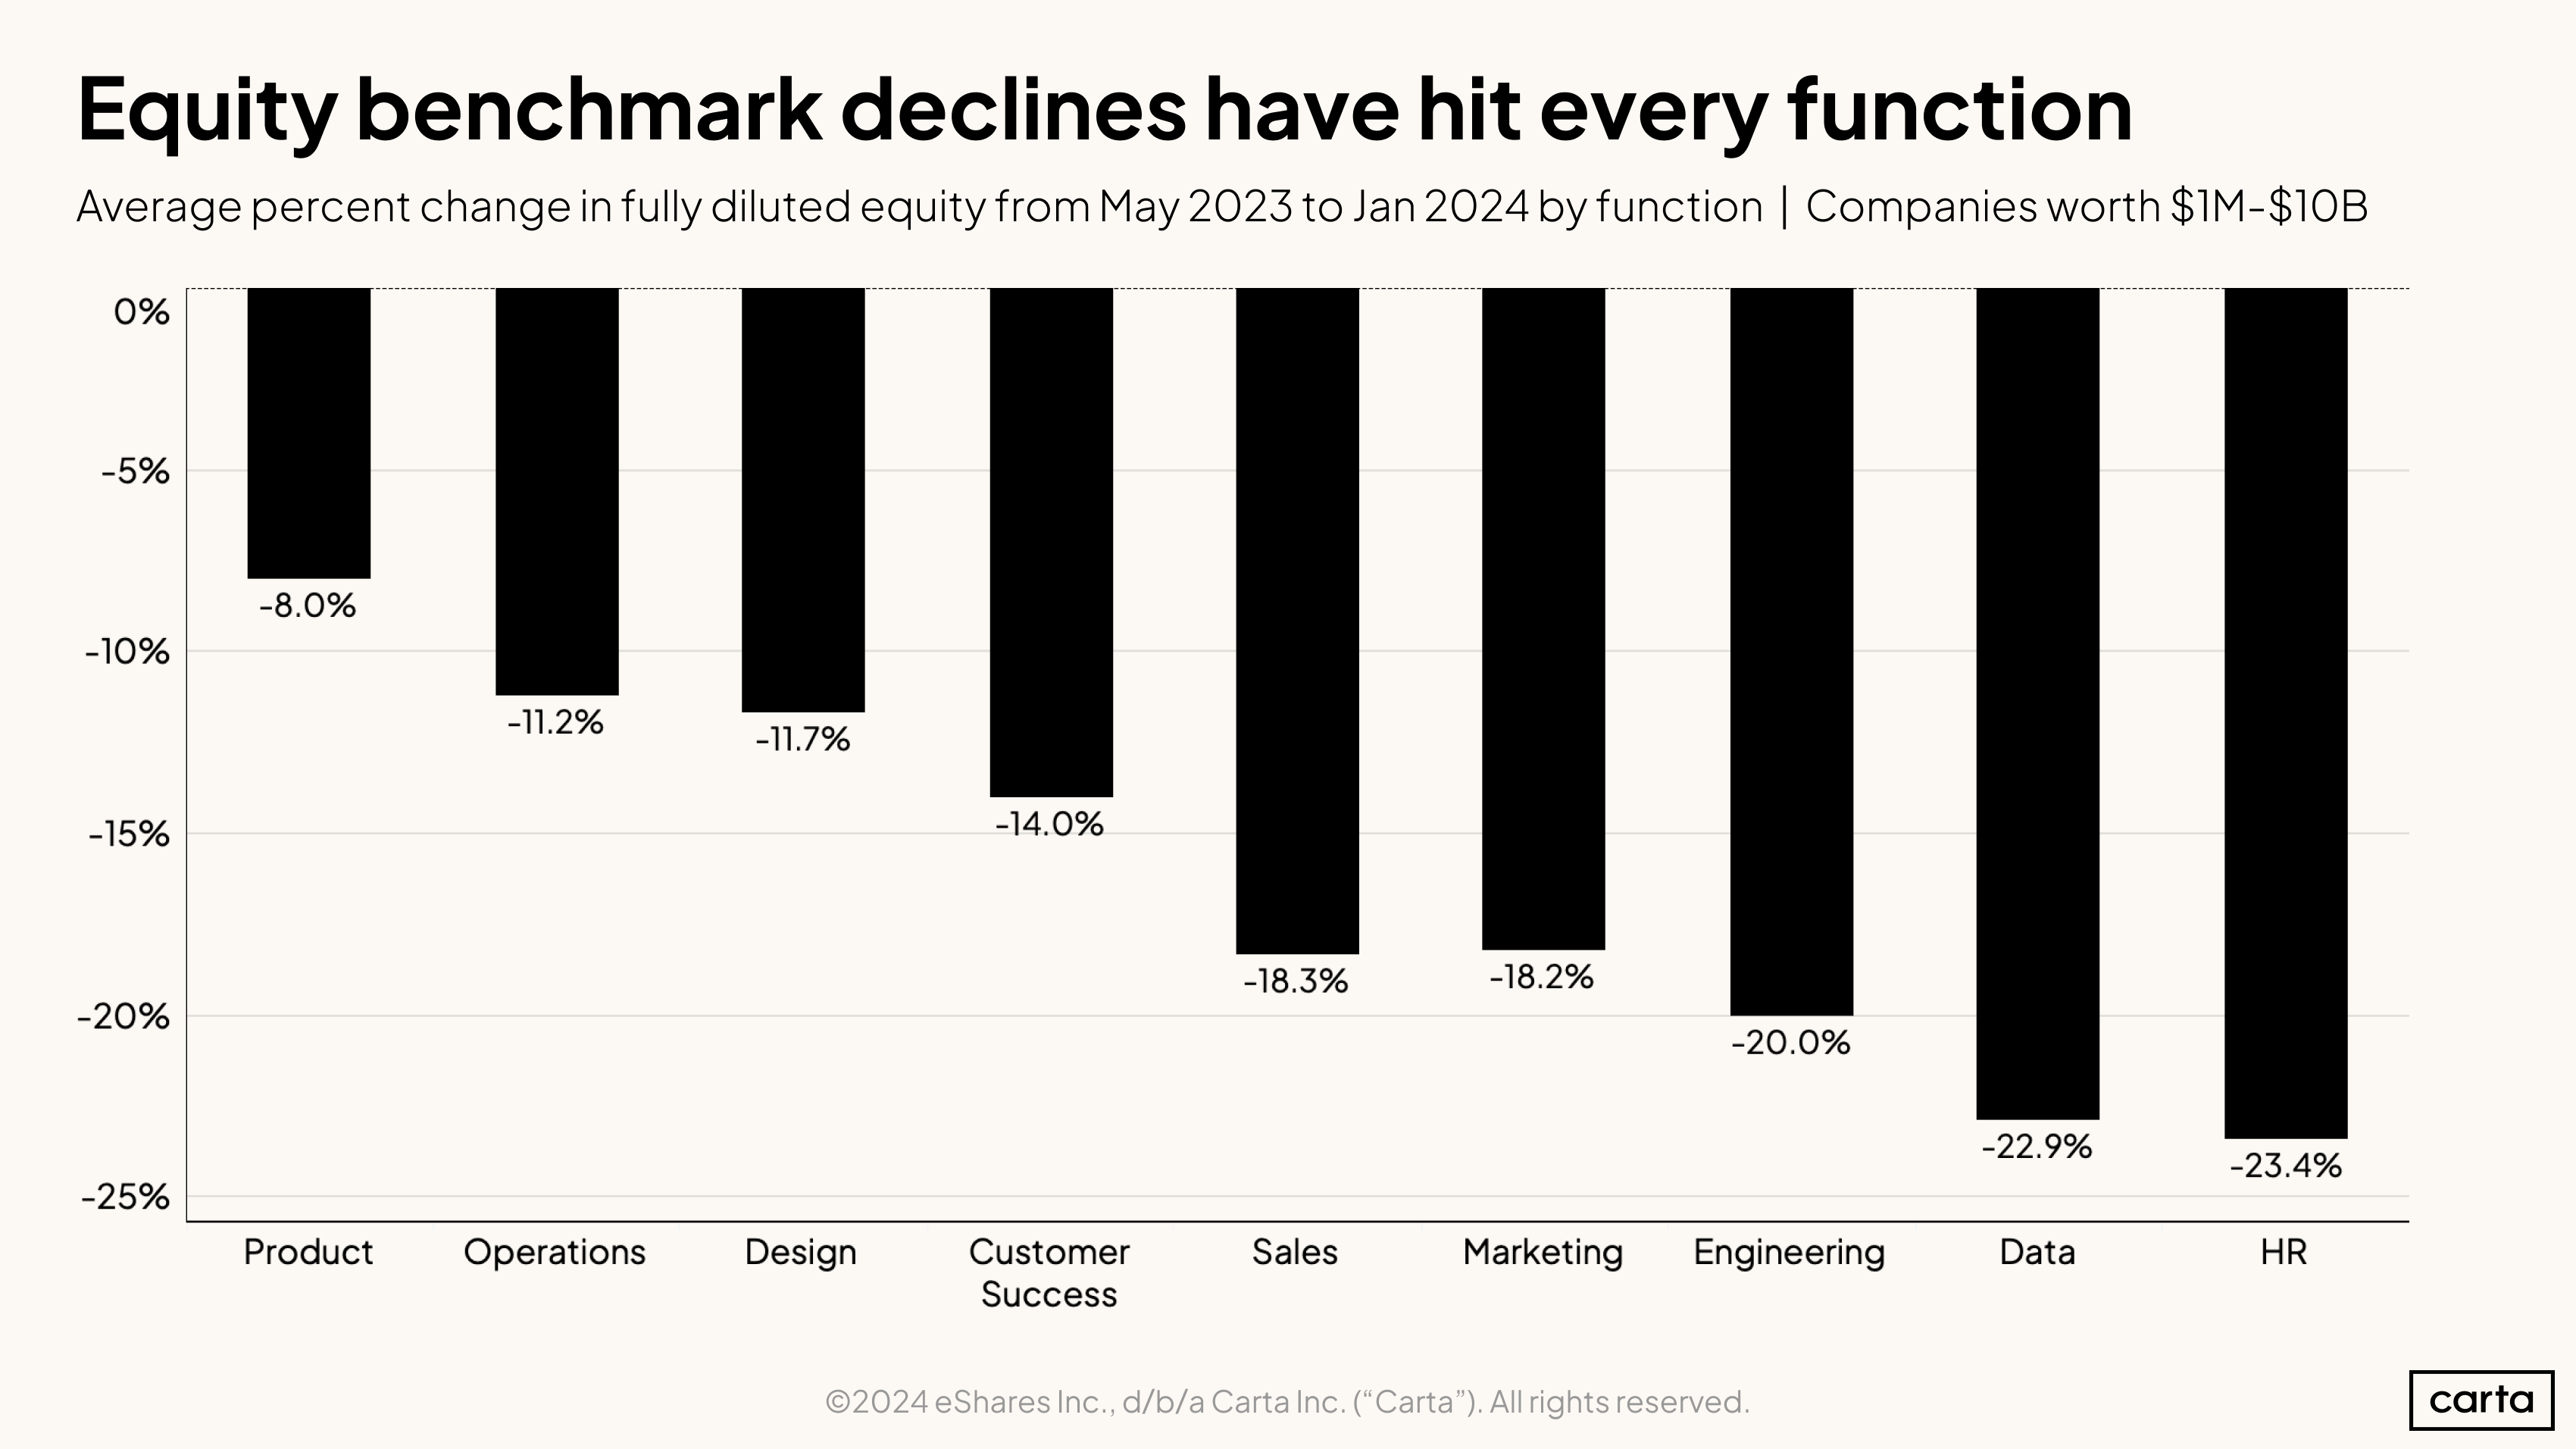 Equity benchmark declines have hit every function